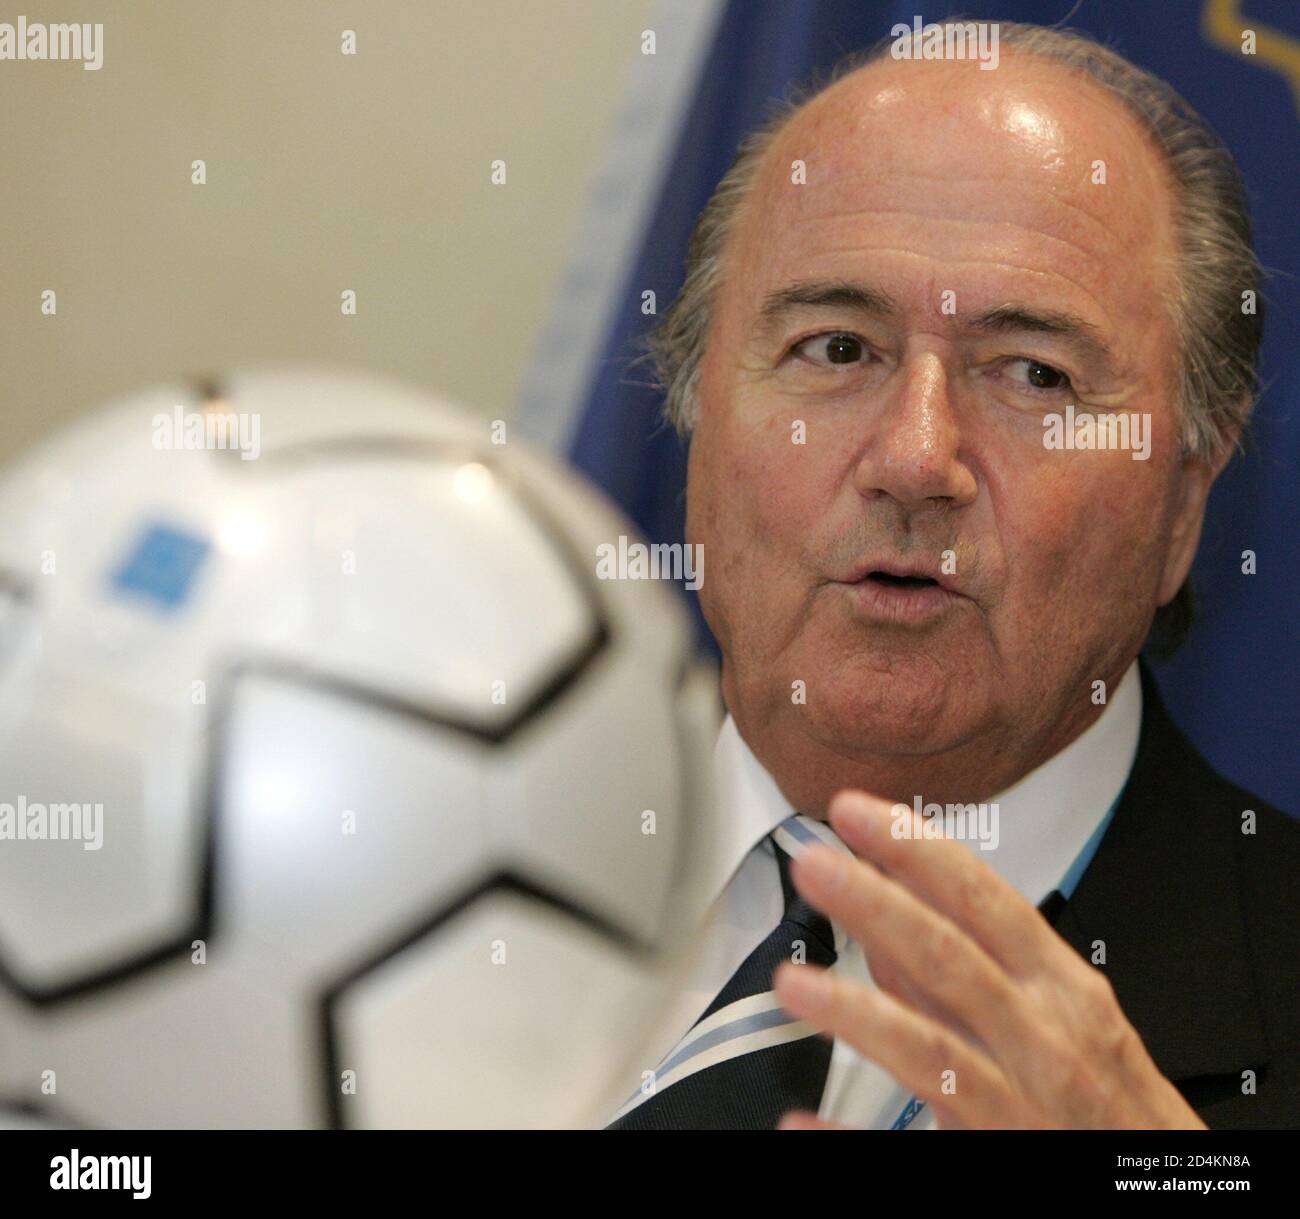 FIFA president Joseph Blatter gestures during a press conference in Athens, August 9, 2004. REUTERS/Ruben Sprich  RS/ Stock Photo